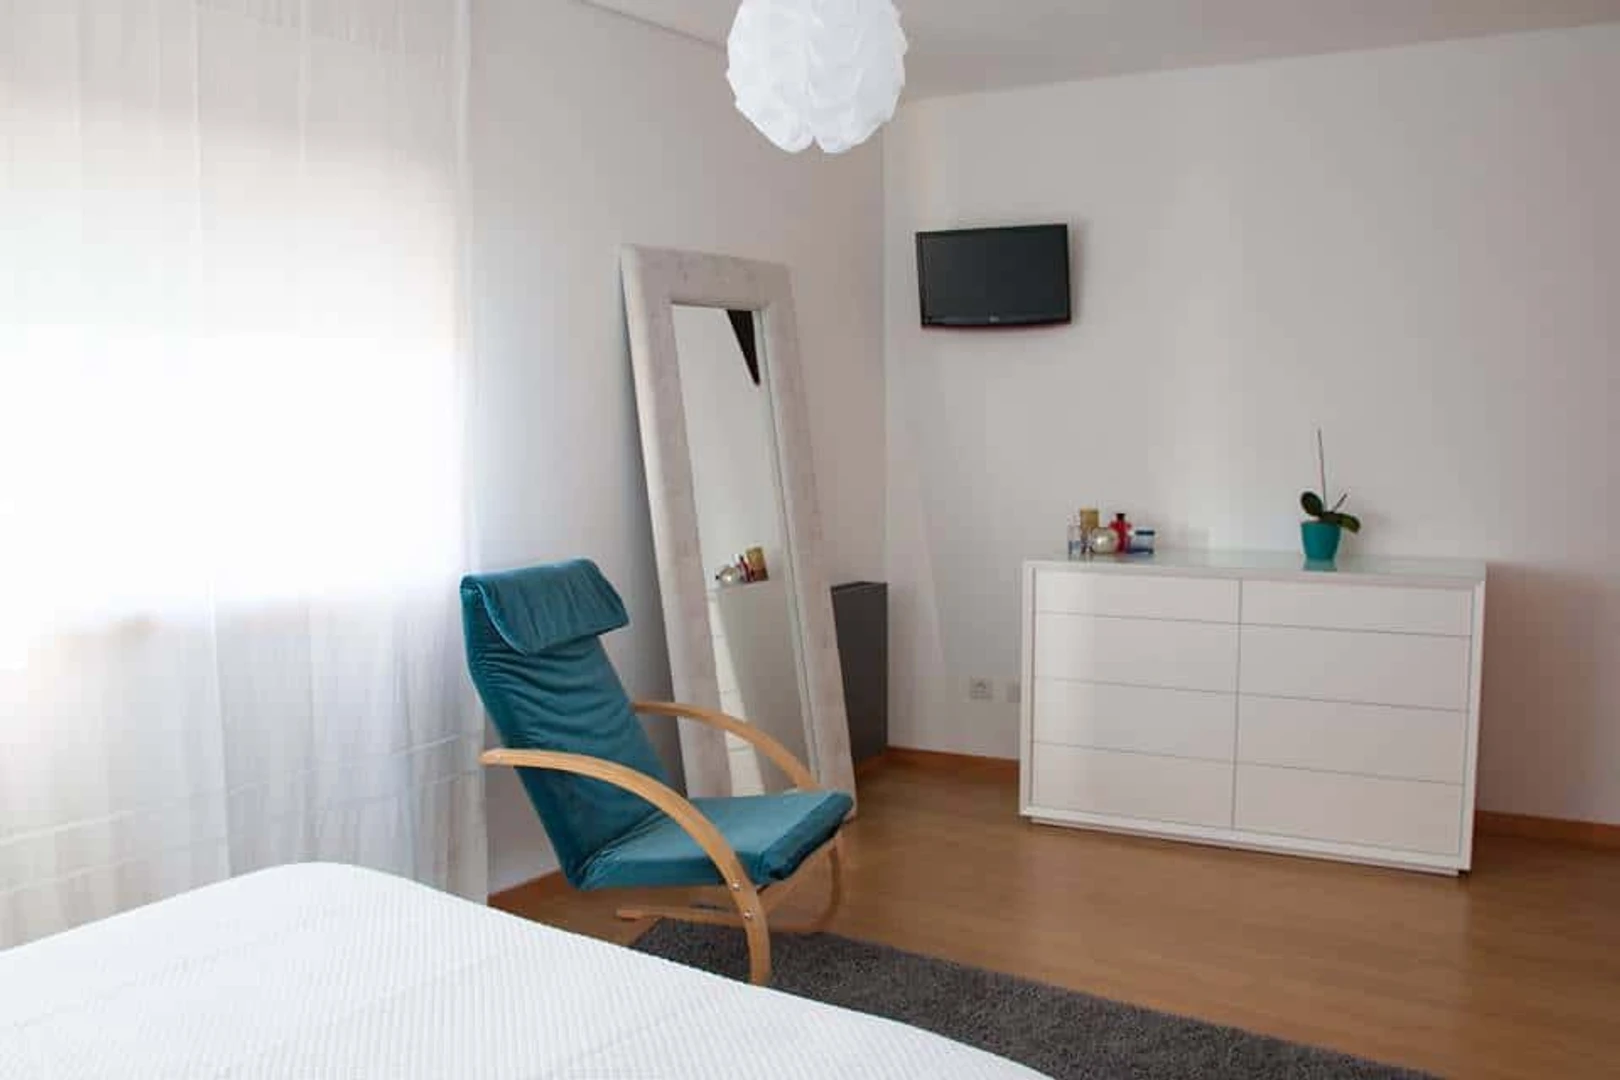 Accommodation with 3 bedrooms in Aveiro